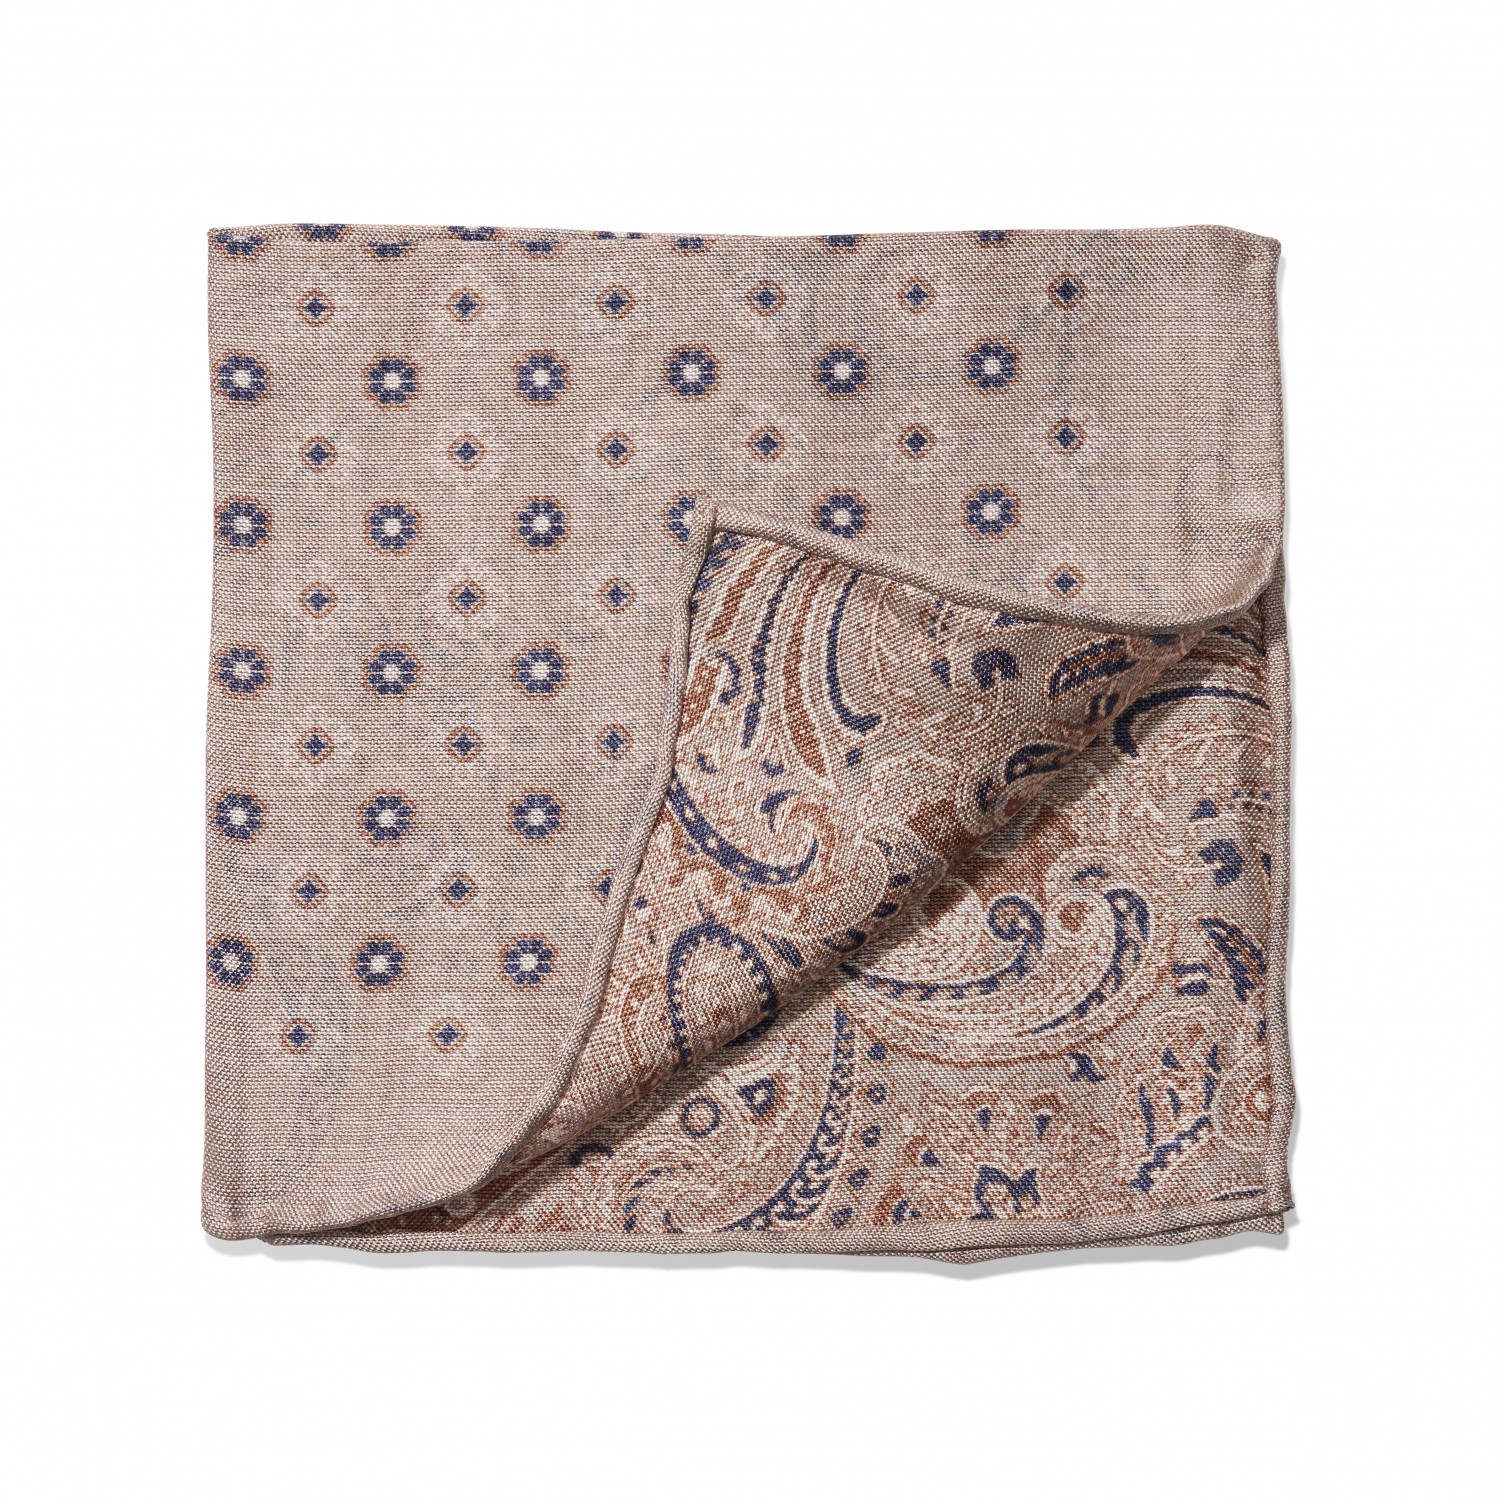 Tan, Blue & Ivory Floral and Paisley Double Sided Pocket Square